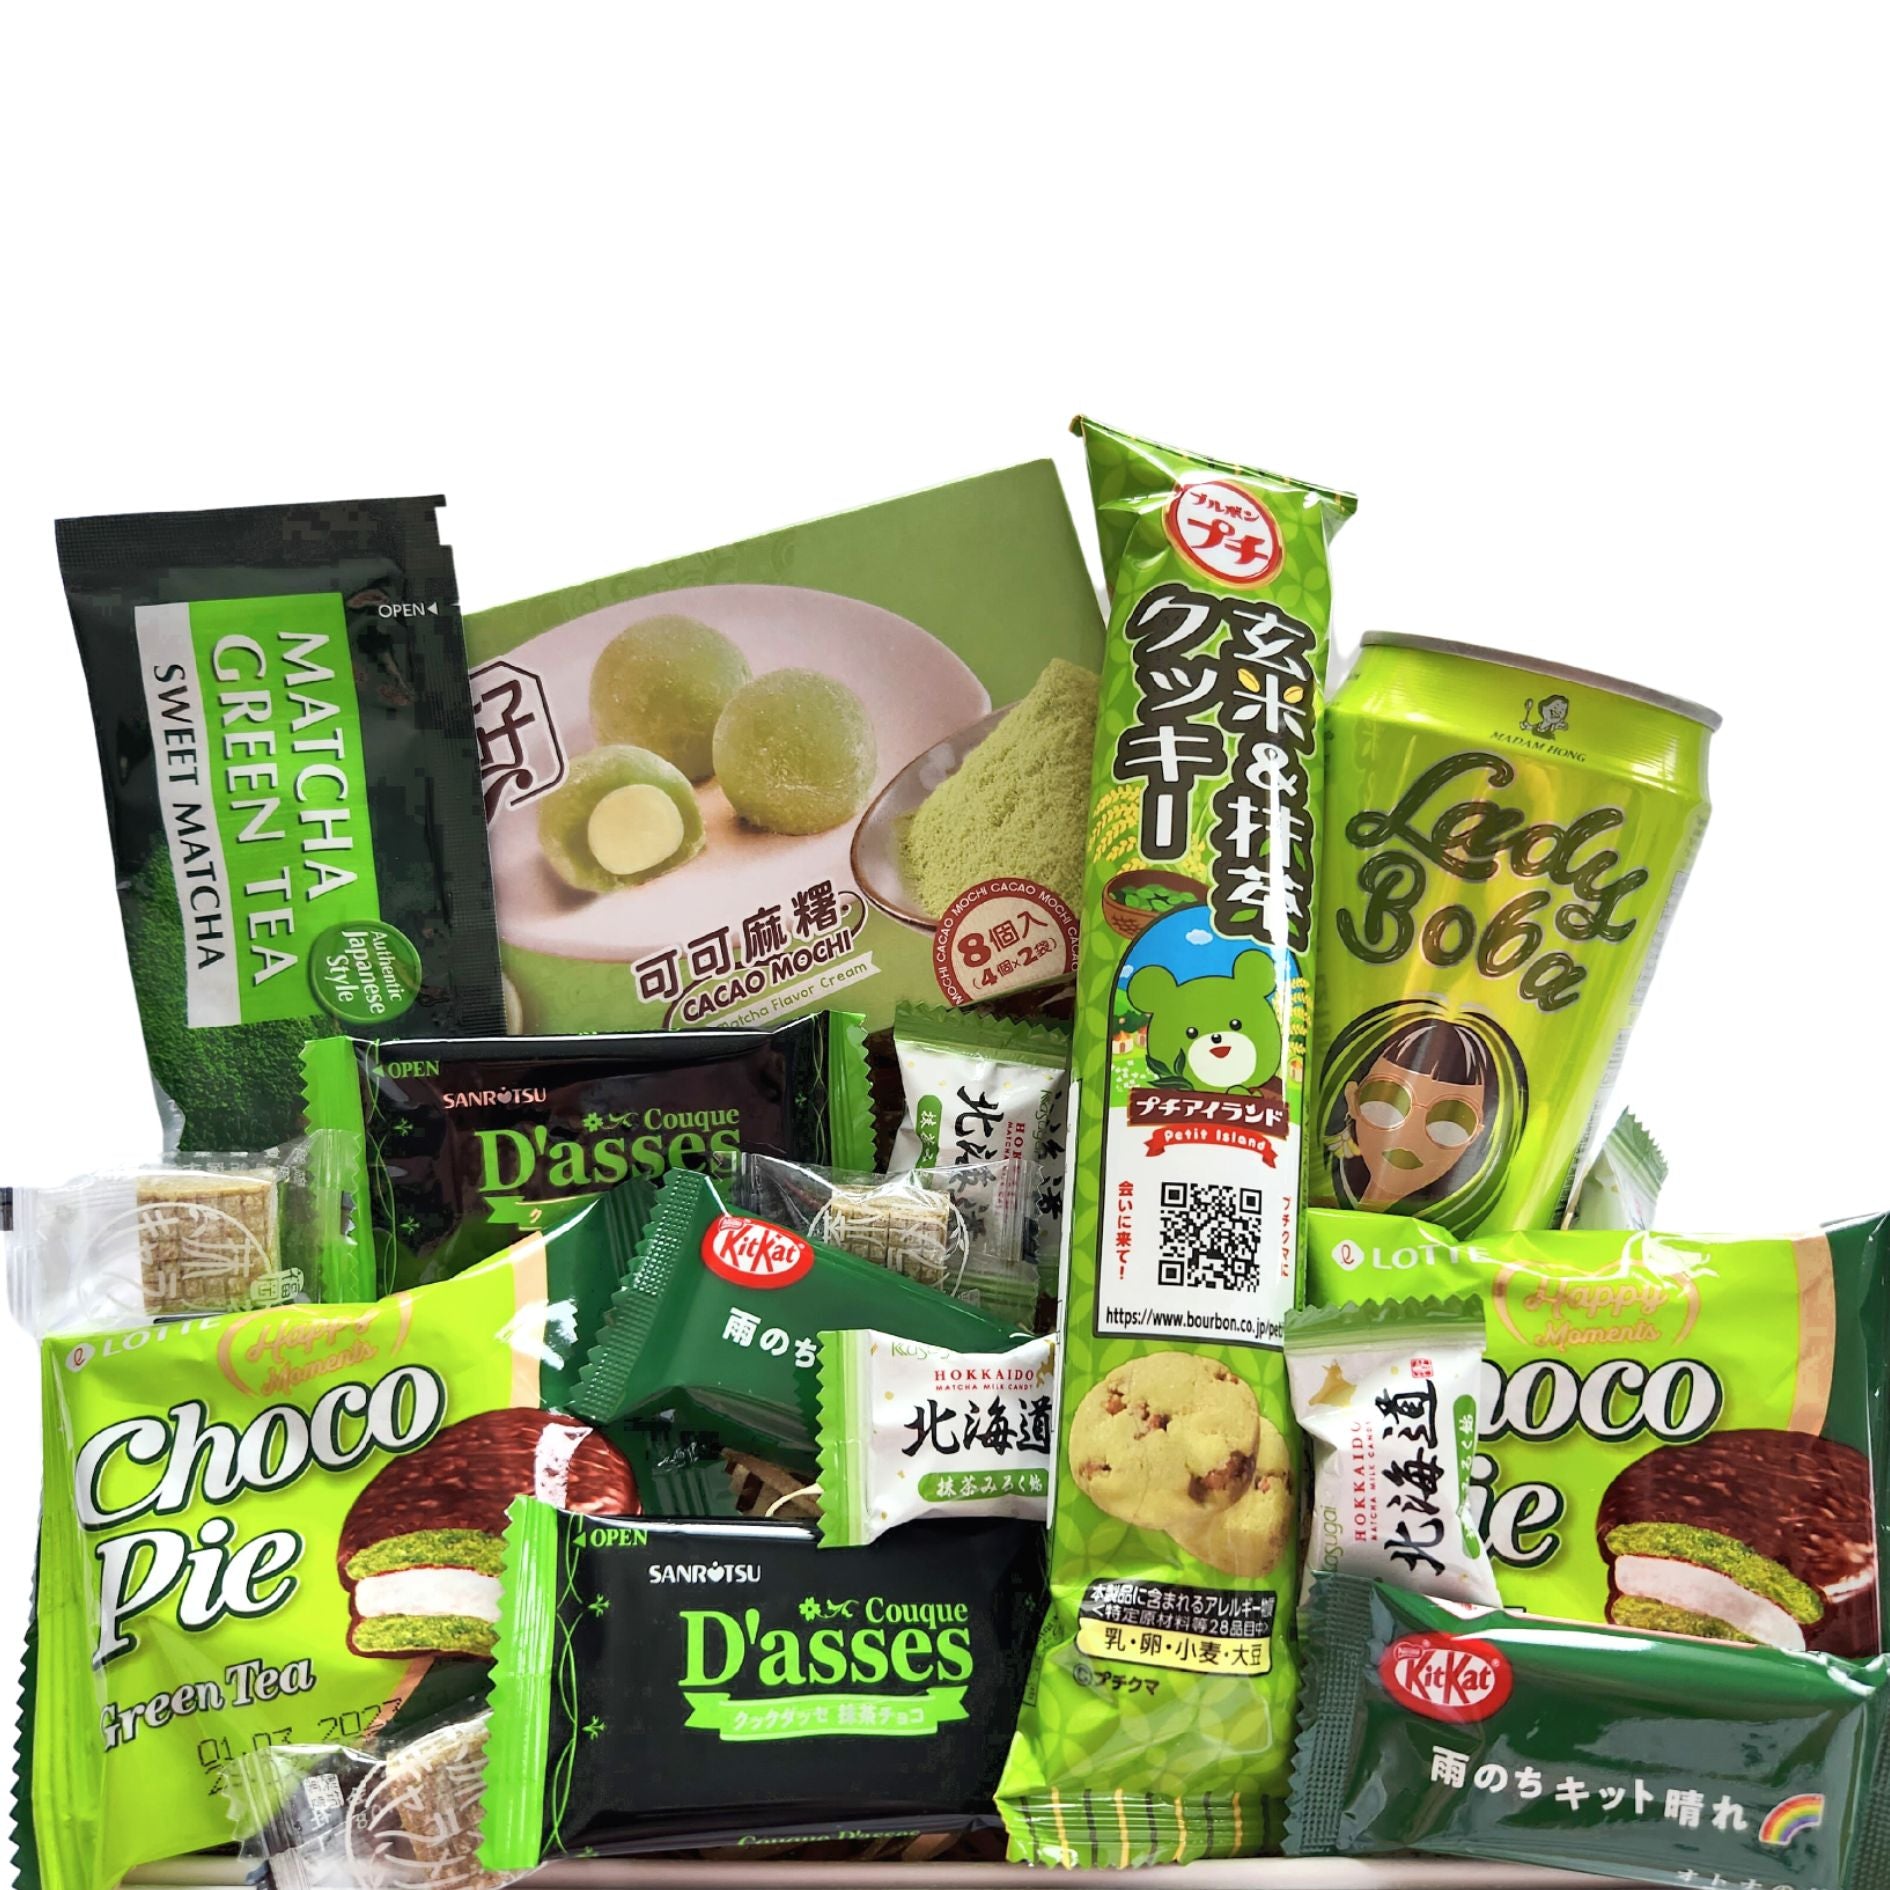 The perfect gift box for all those matcha lovers! Filled with a range of matcha treats, this gift box would make an awesome gift, or just to treat yourself.   What's in the Box?  Bourbon petit matcha cookies x1 Sanritsu Couque Dasses matcha green tea cookie x2 Matcha Choco Pie x2 KitKat green tea mini x2 Lady Boba matcha latte x1 Hokkaido matcha milk candy x4 Chikuho Matcha caramels x4 Cacao Mochi matcha box x1 Iteon sweet matcha powder x1